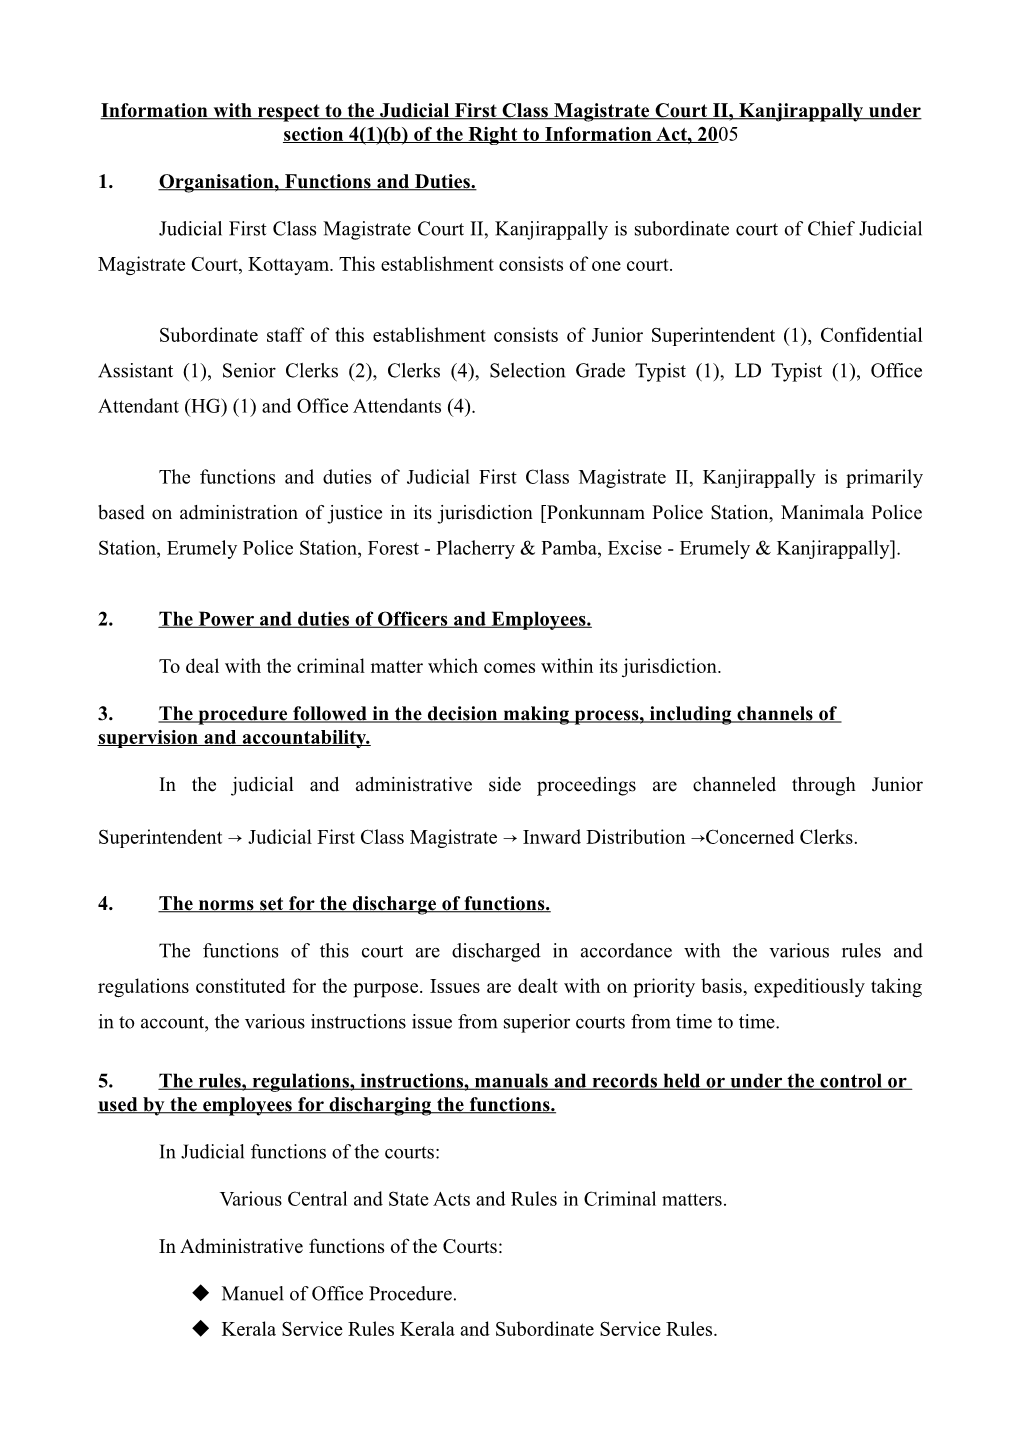 Information with Respect to the Judicial First Class Magistrate Court II, Kanjirappally Under Section 4(1)(B) of the Right to Information Act, 2005